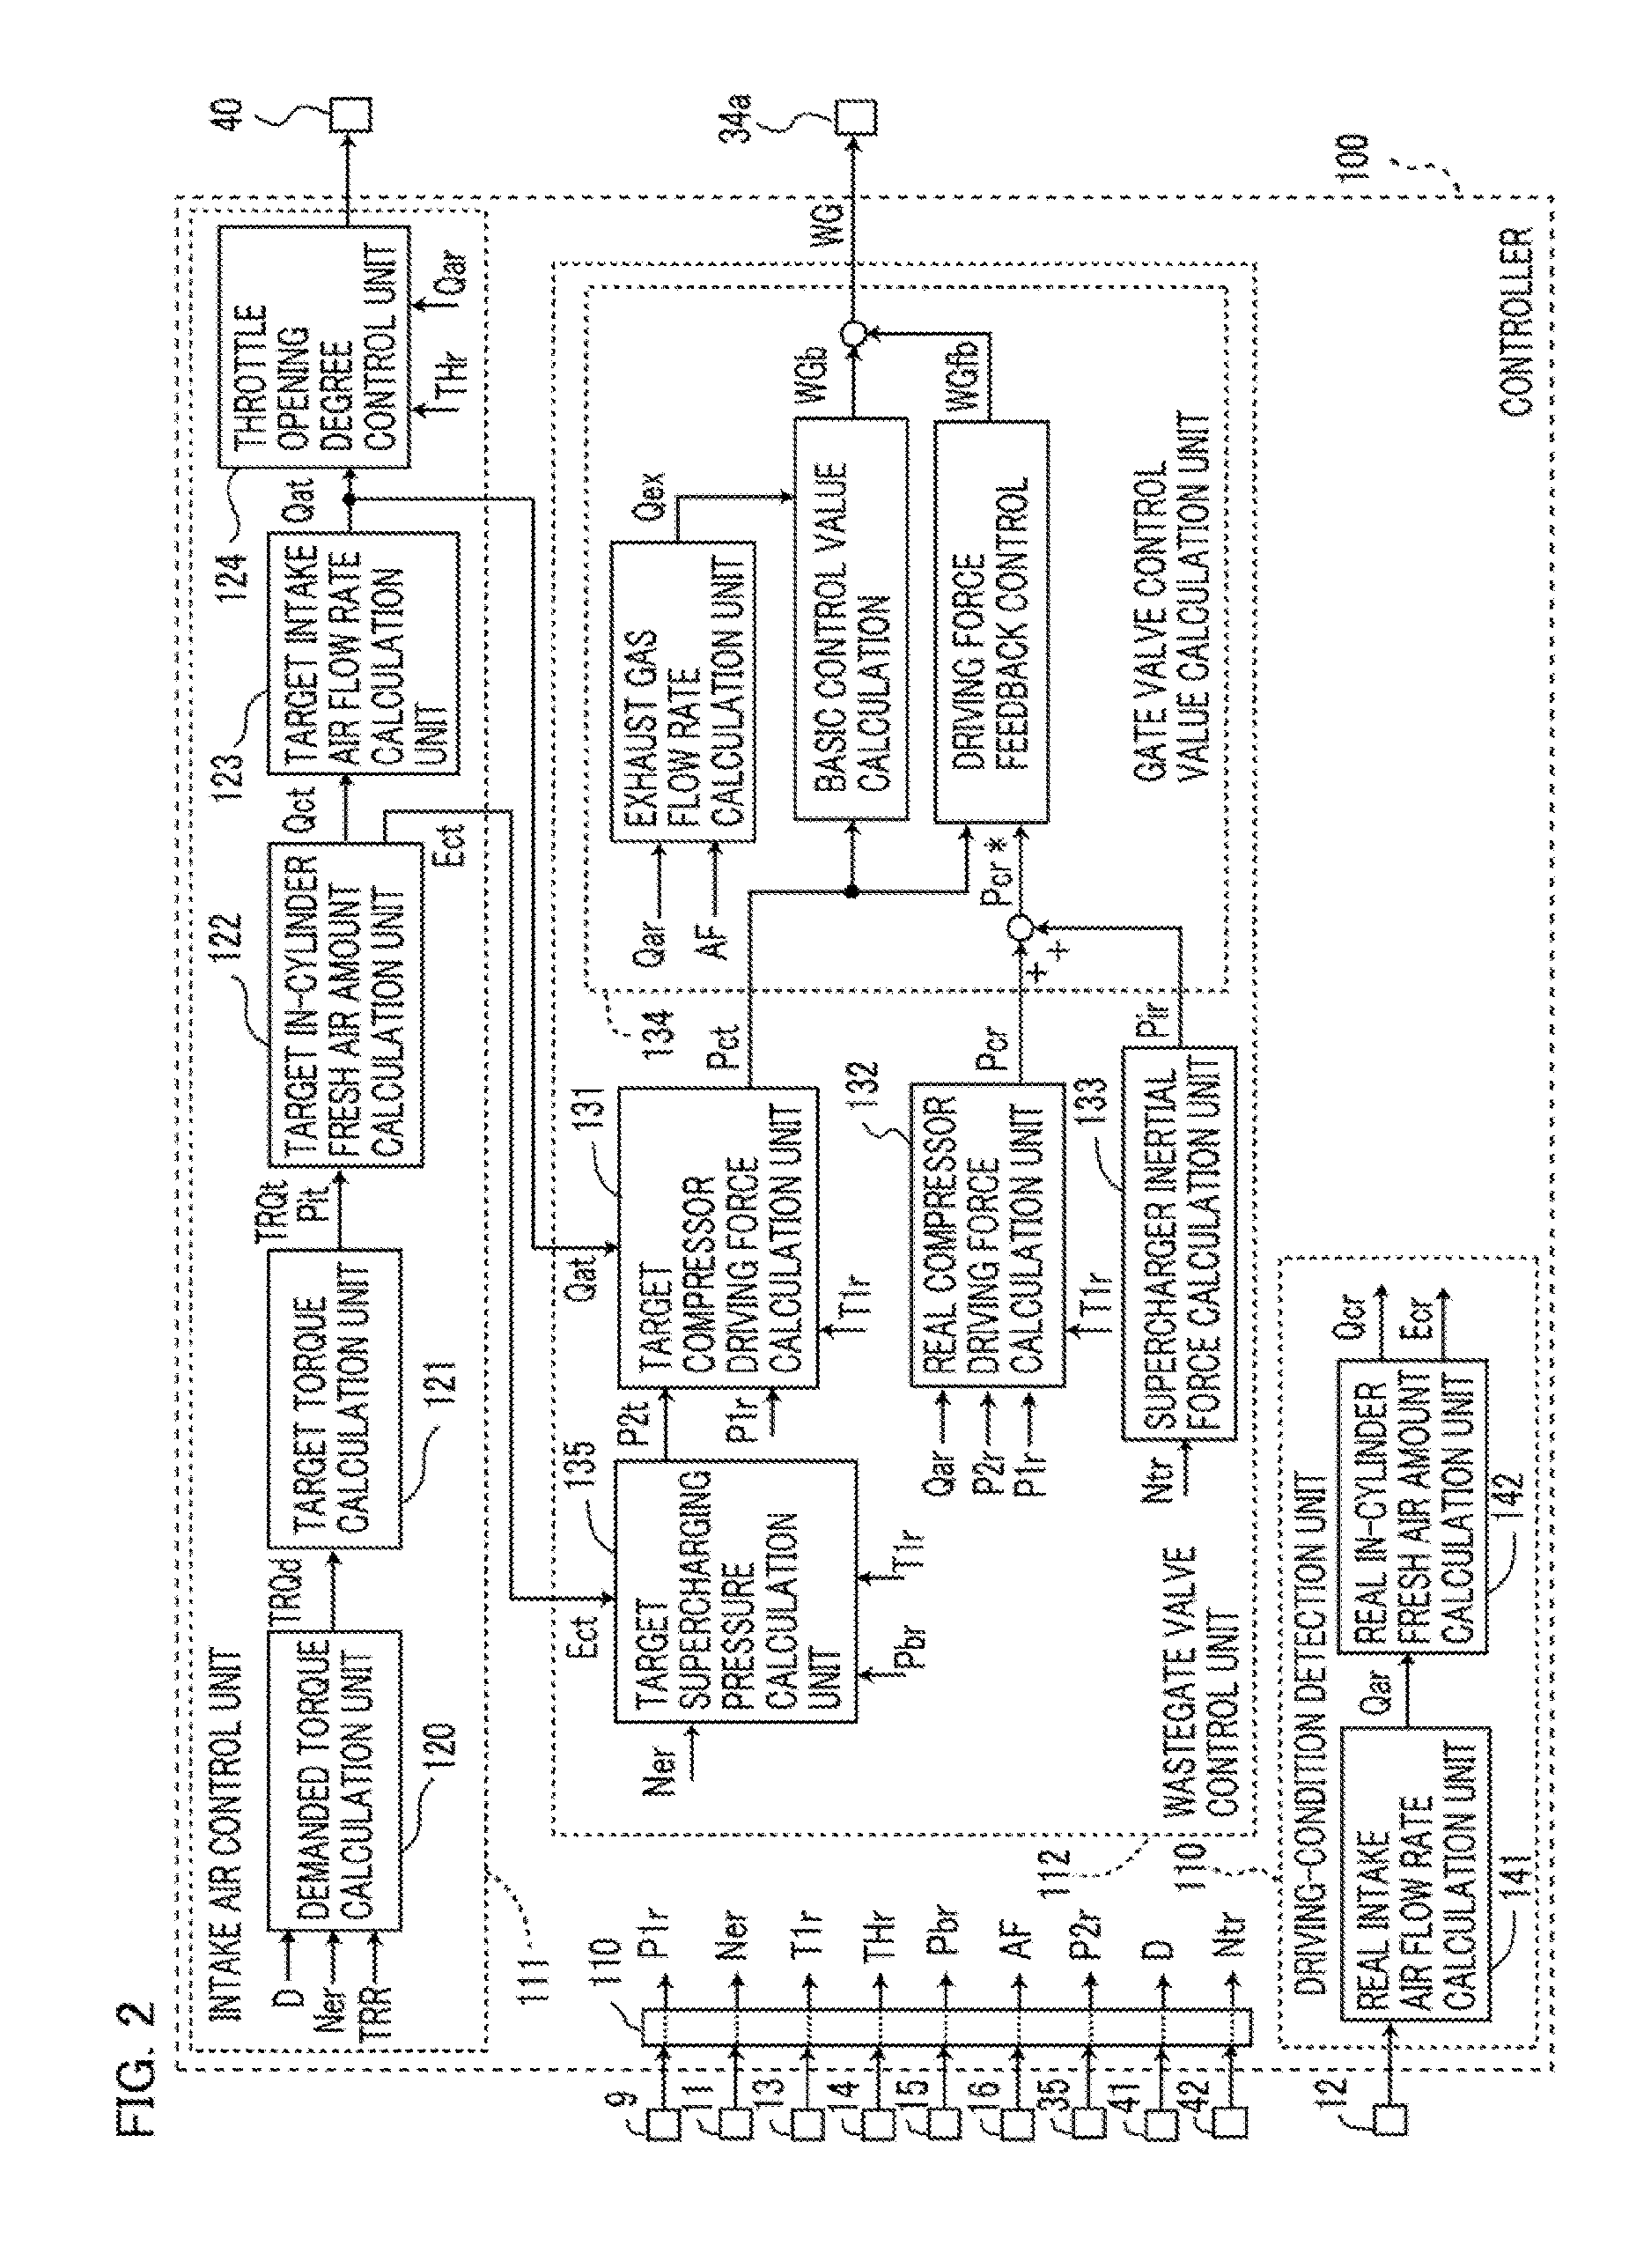 Controller for supercharger-equipped internal combustion engine